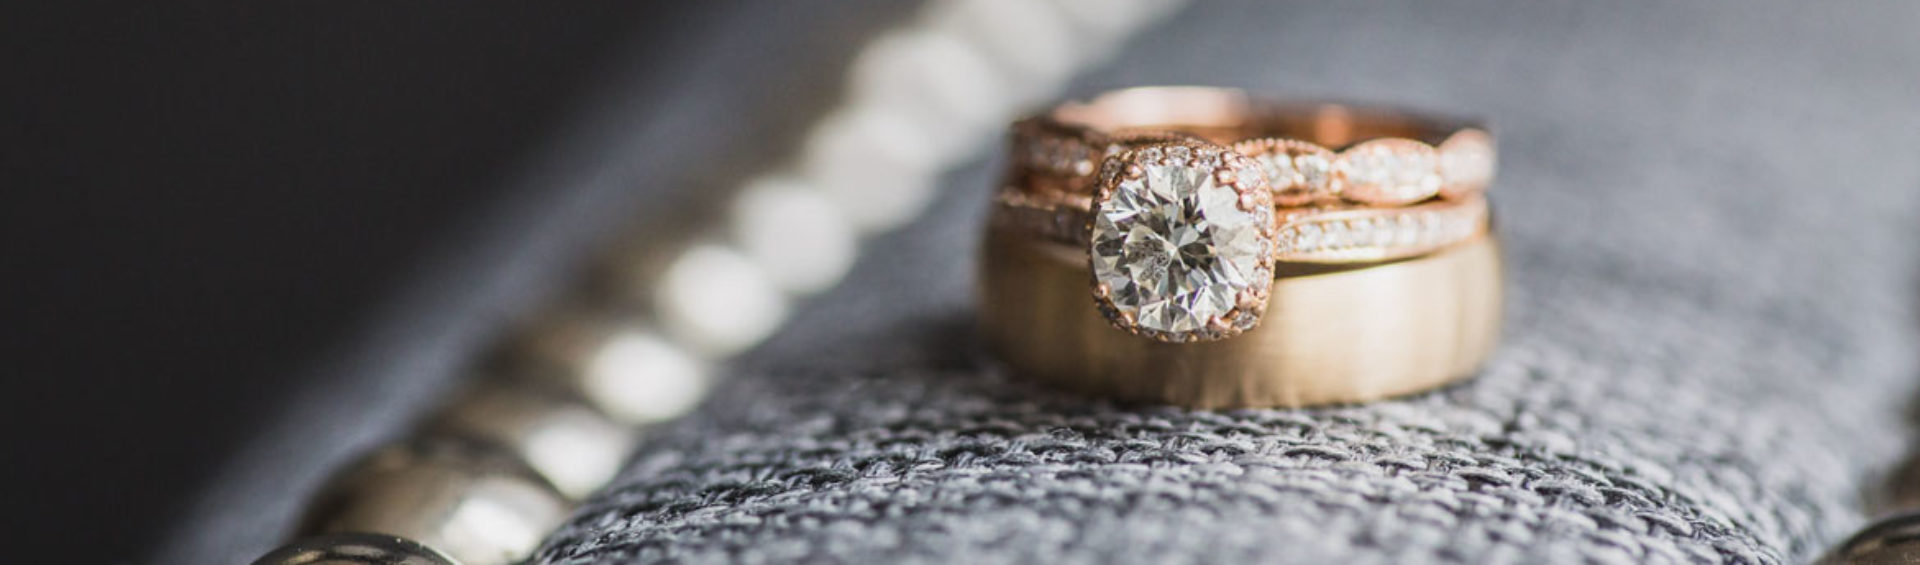 Nieto houston wedding ring at jw marriott downtown by steve lee photography